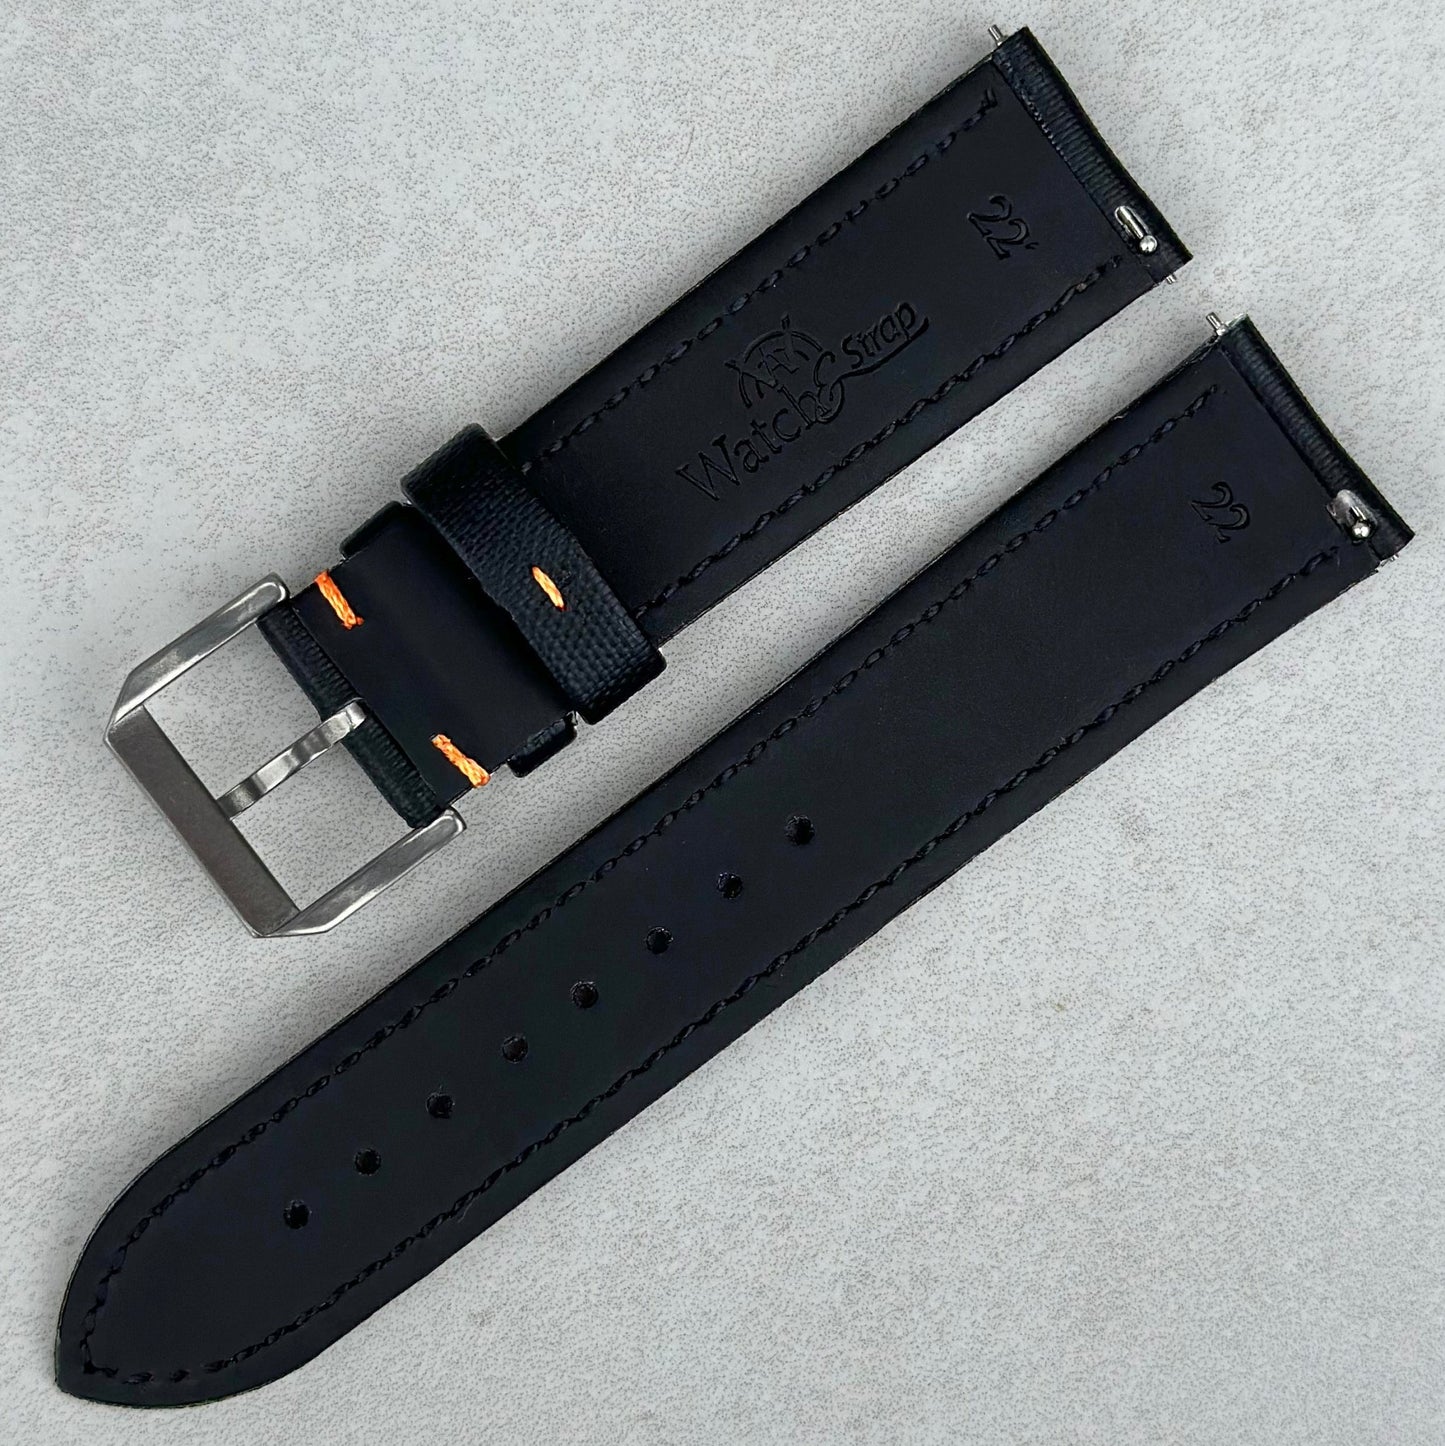 Rear of the Bermuda jet black sail cloth watch strap with contrast orange stitching. Quick release pins. Watch And Strap.